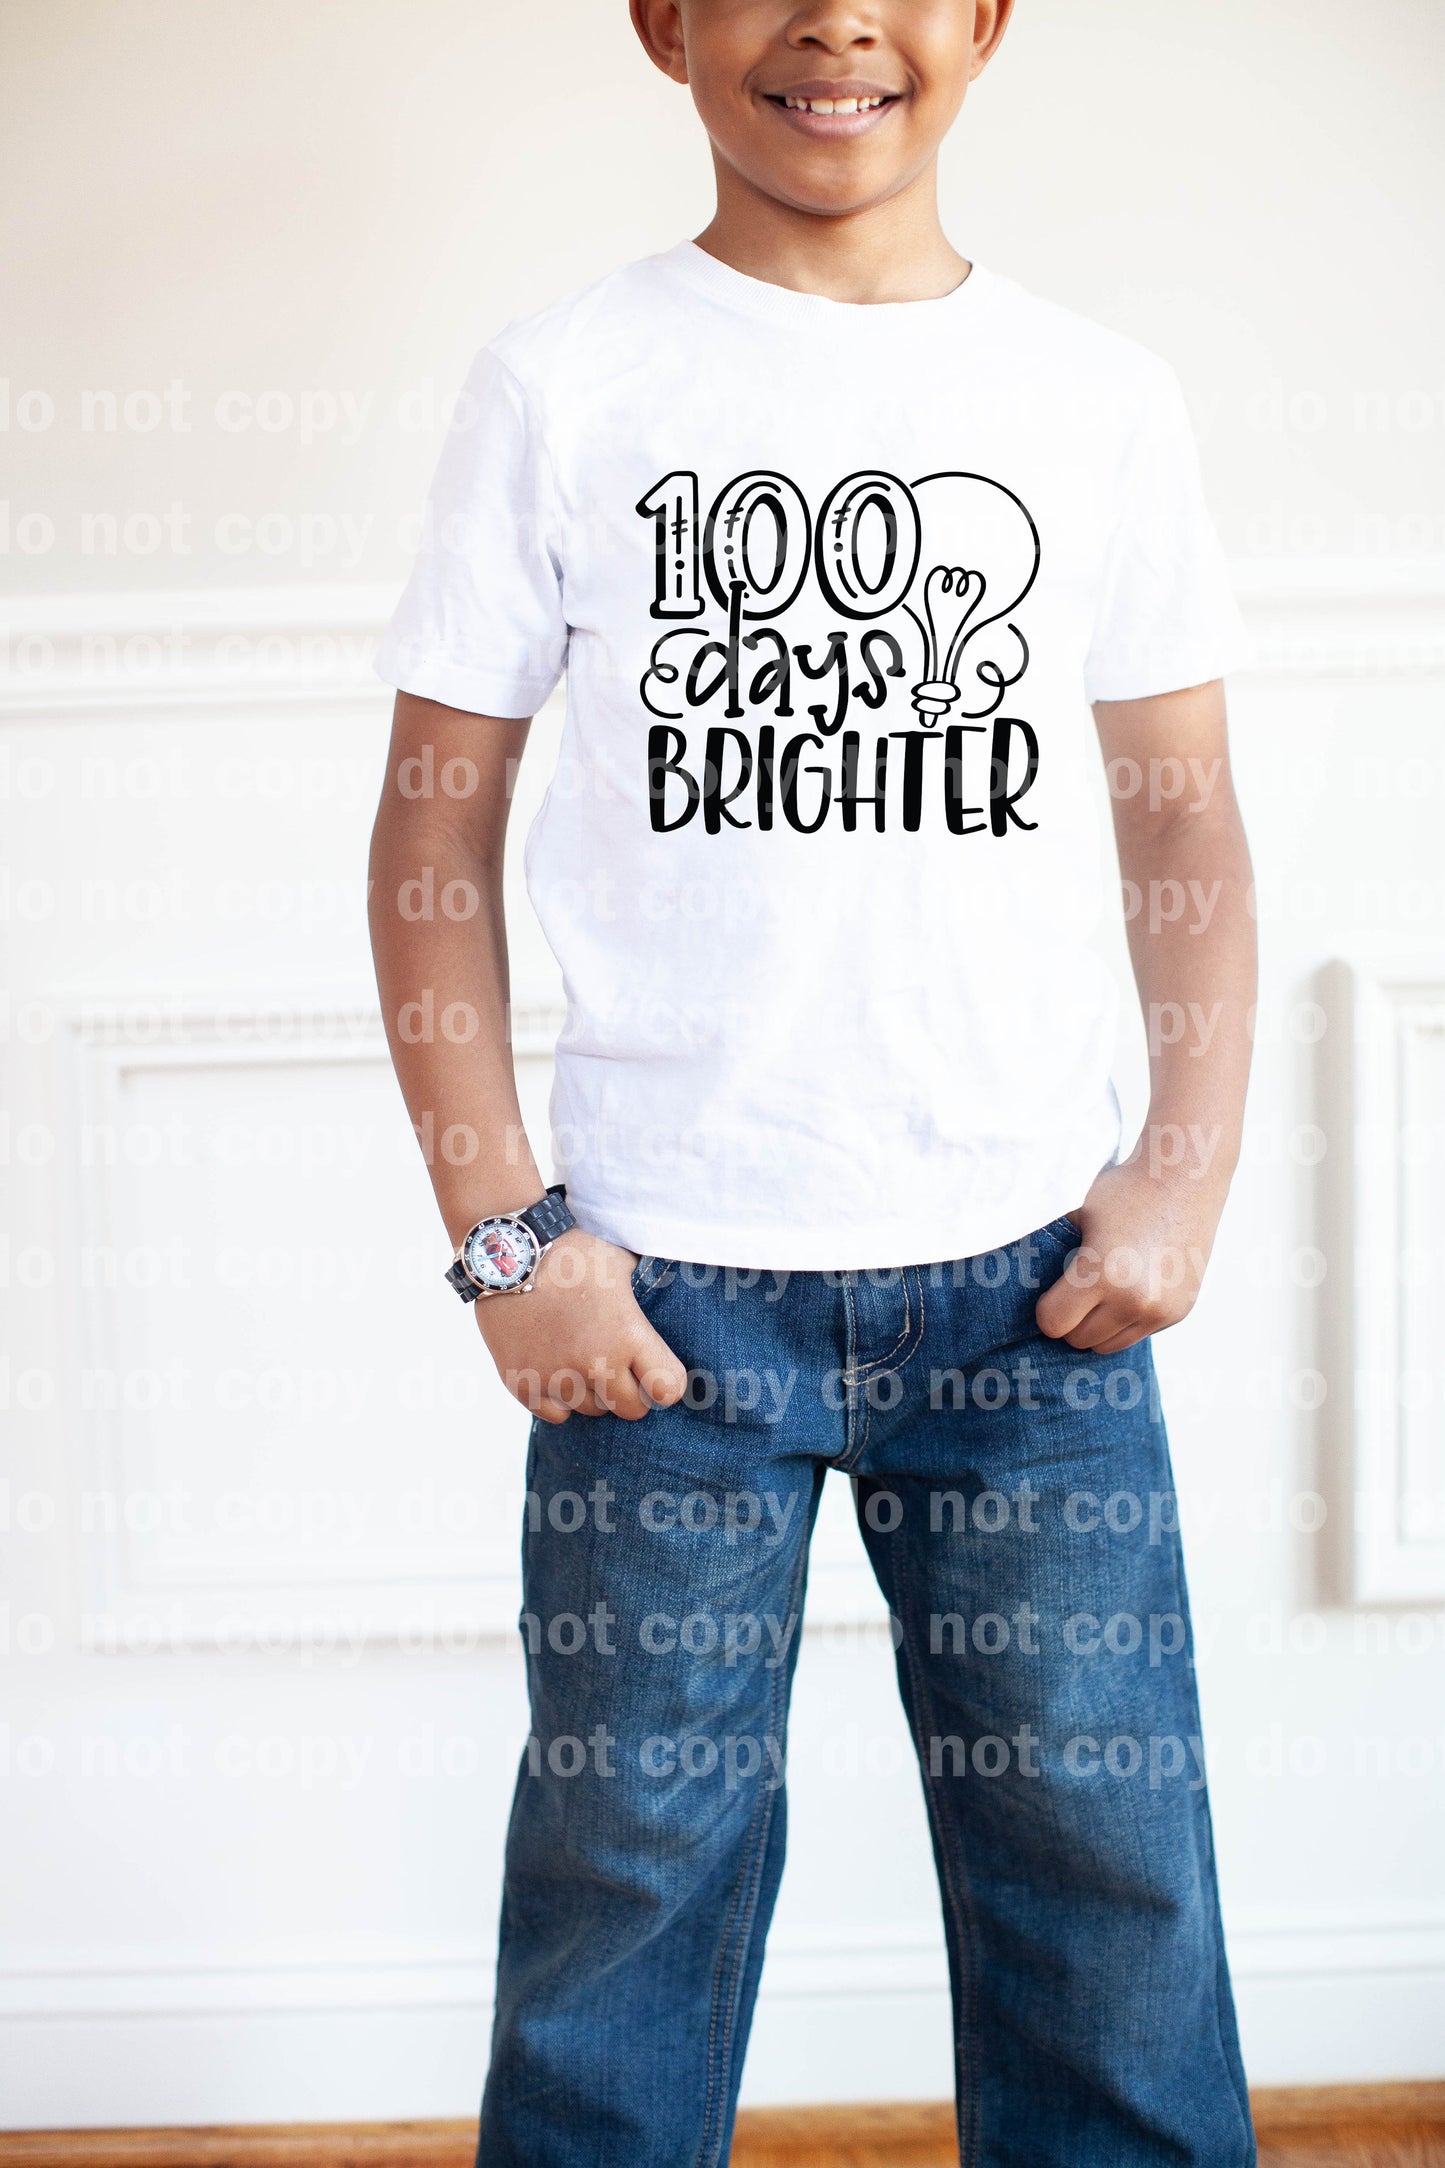 100 Days Brighter Dream Print or Sublimation Print